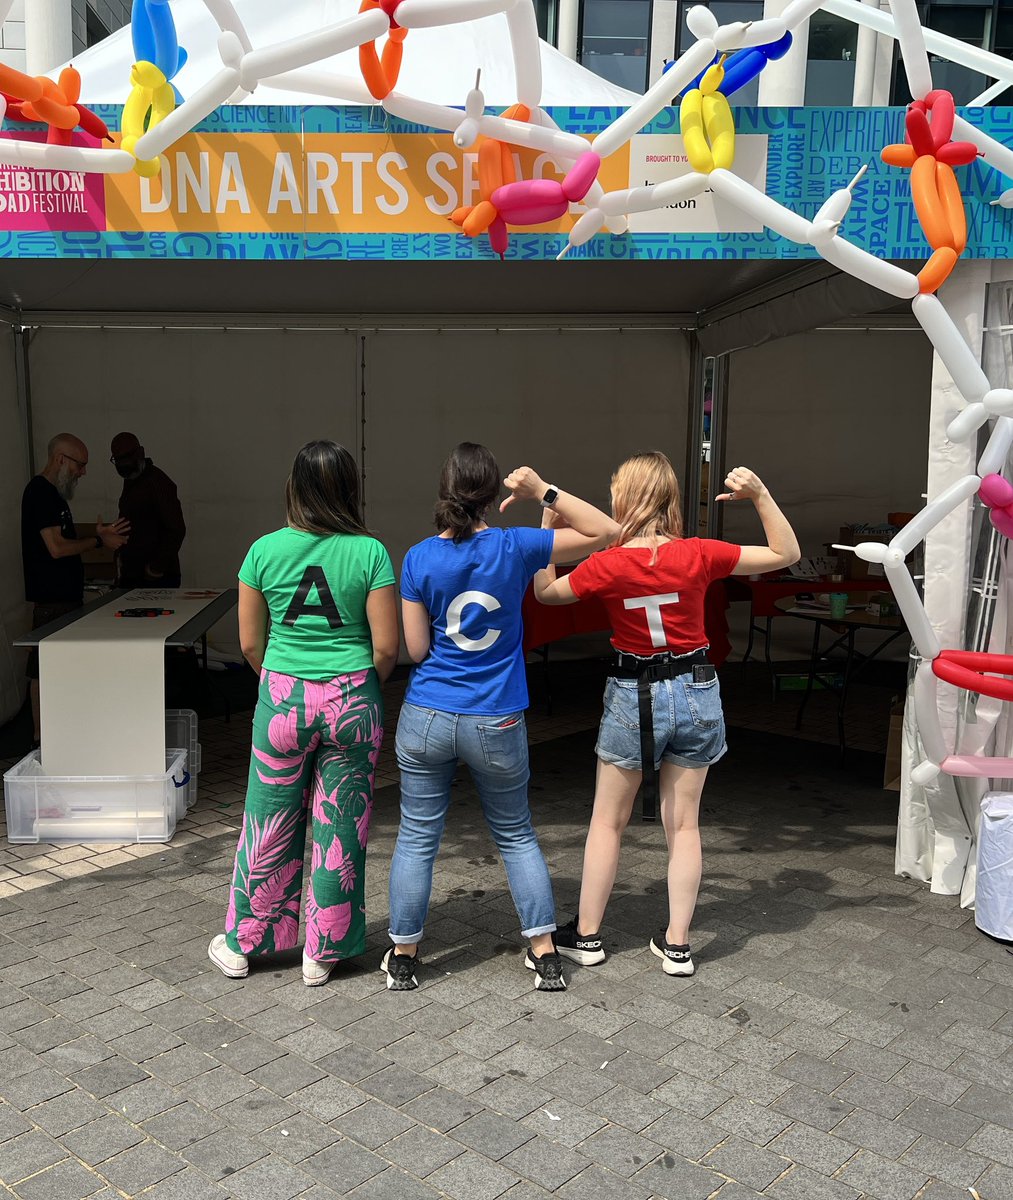 Get your A C T together and come see us at the DNA Arts Space on Great Exhibition road! #thegreatexhibitionroadfestival #ExRdFest #imperialcollege @Hammaude @CebolaLab  @ExRdFestival @imperialcollege @ImperialMDR